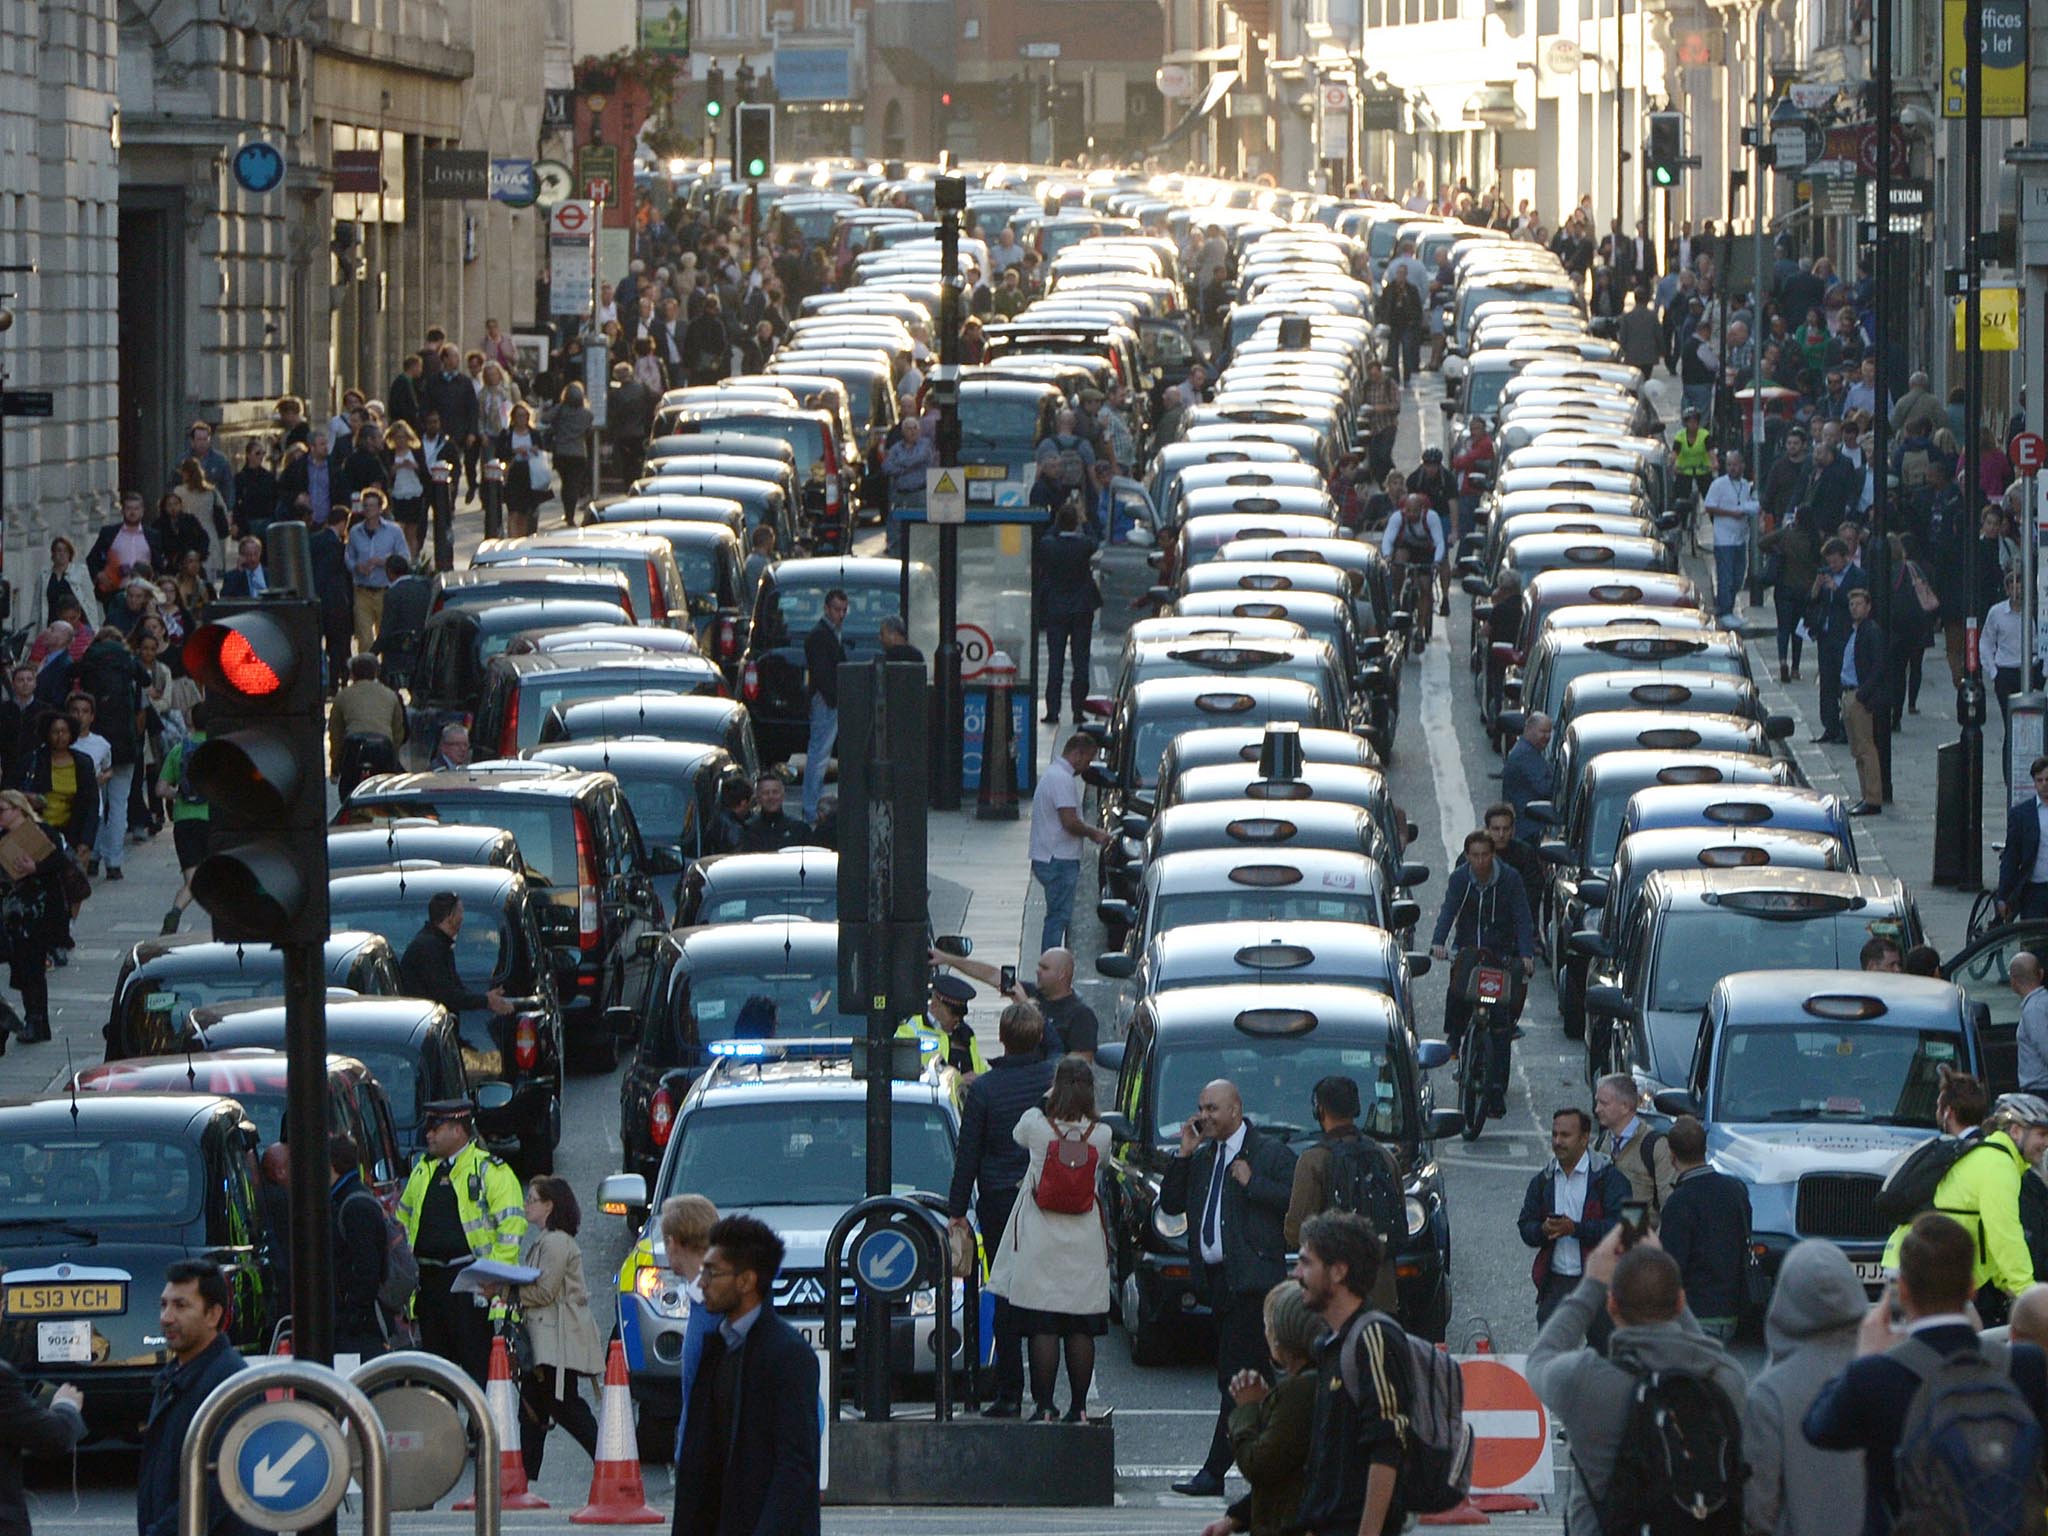 Black cab drivers held numerous protests over Uber’s business model, which was used by 3.5 million Londoners